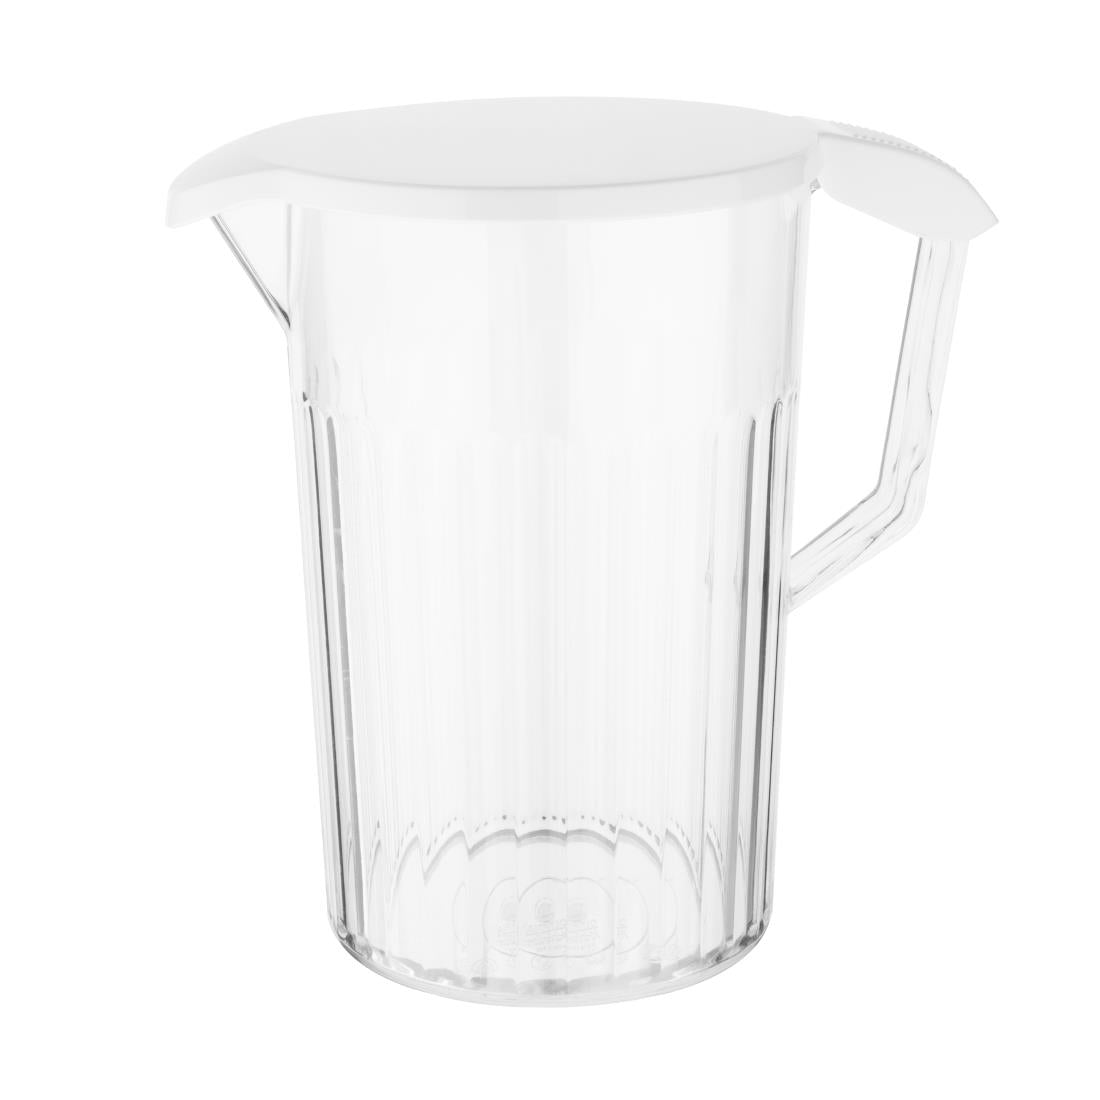 Olympia Kristallon White Polycarbonate Lid for 1.4Ltr Jug